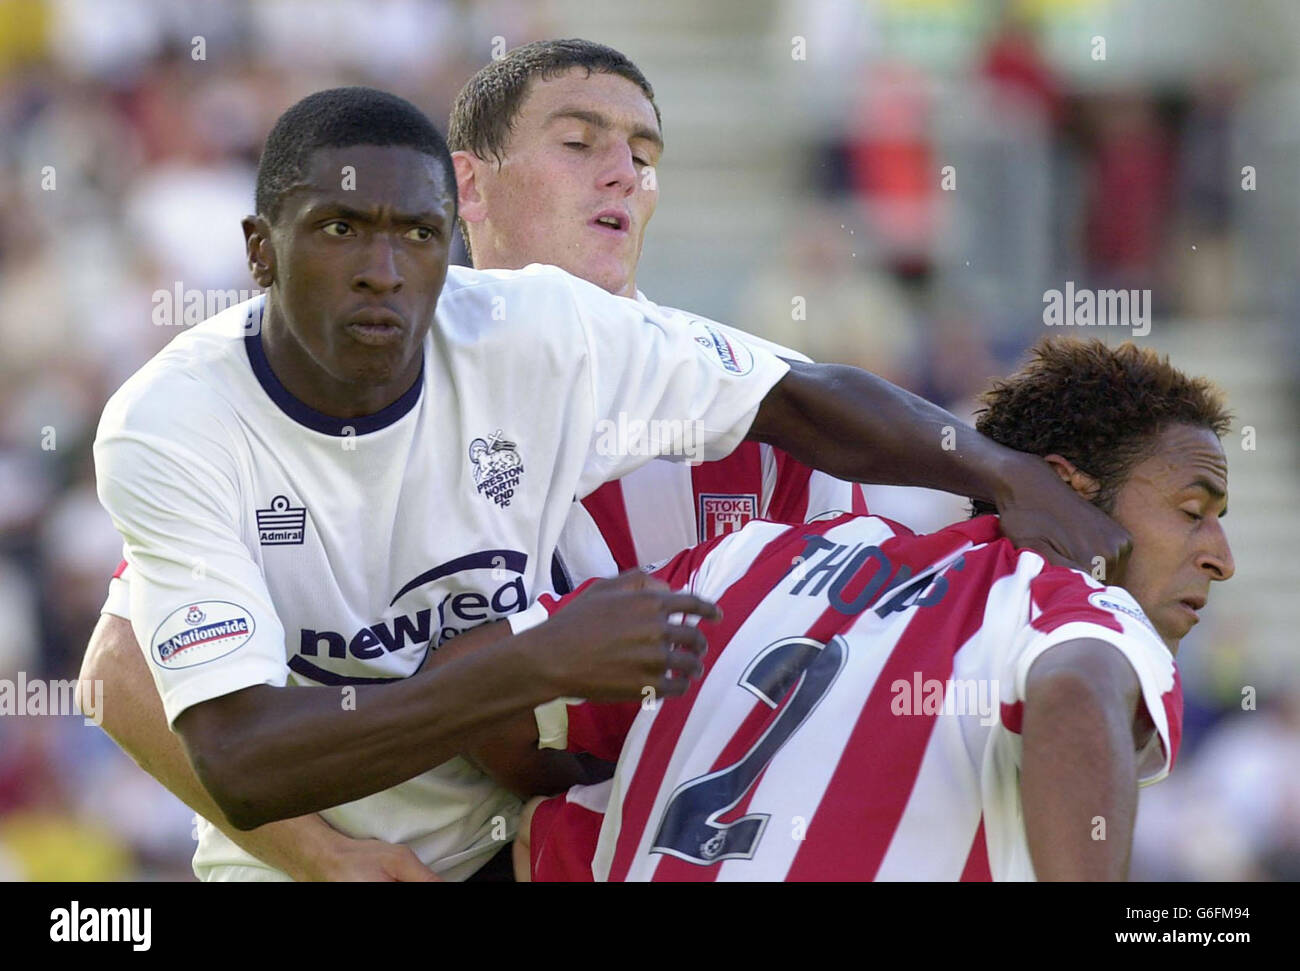 Preston's Dickson Etuhu (left) finds a Stoke's Wayne Thomas, during their Nationwide Division One match at Preston's Deepdale ground. Final score: Preston 1, Stoke City nil. NO UNOFFICIAL CLUB WEBSITE USE. Stock Photo